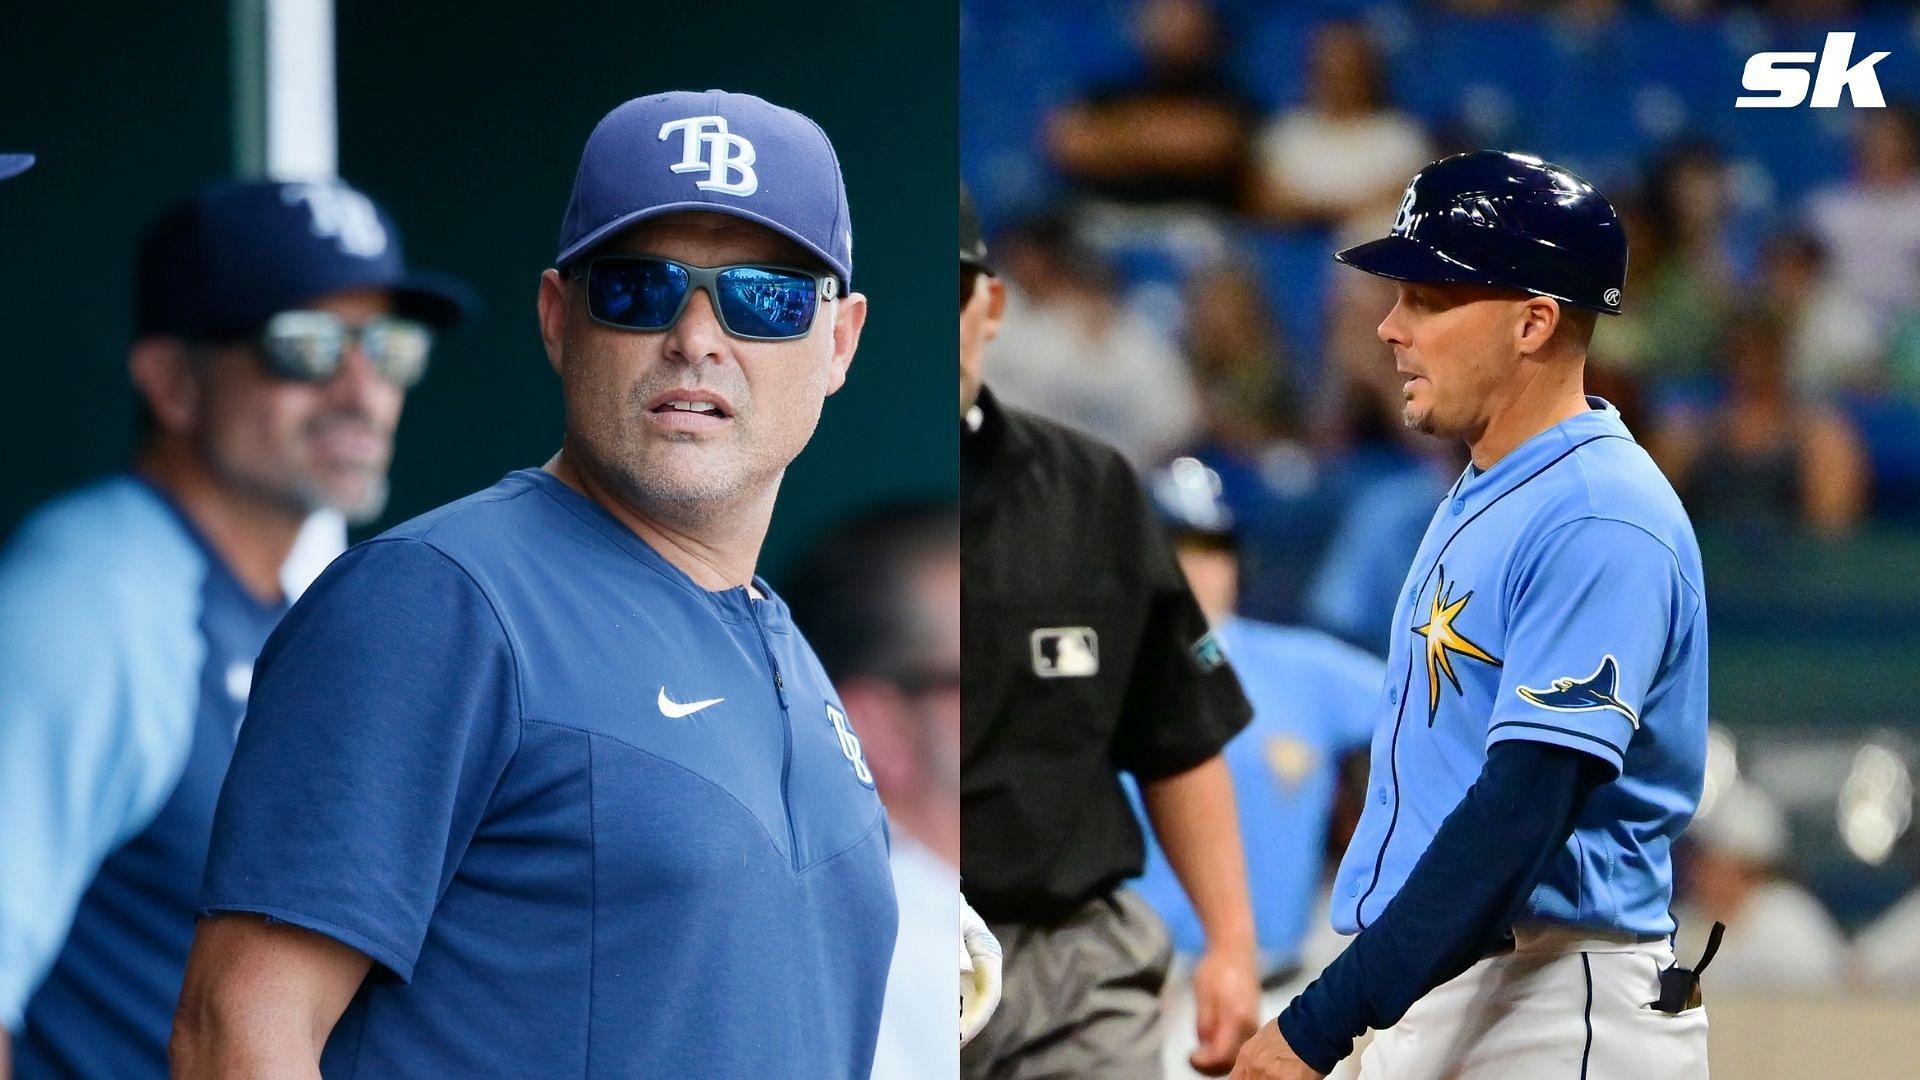 The Tampa Bay Rays have announced some managerial changes